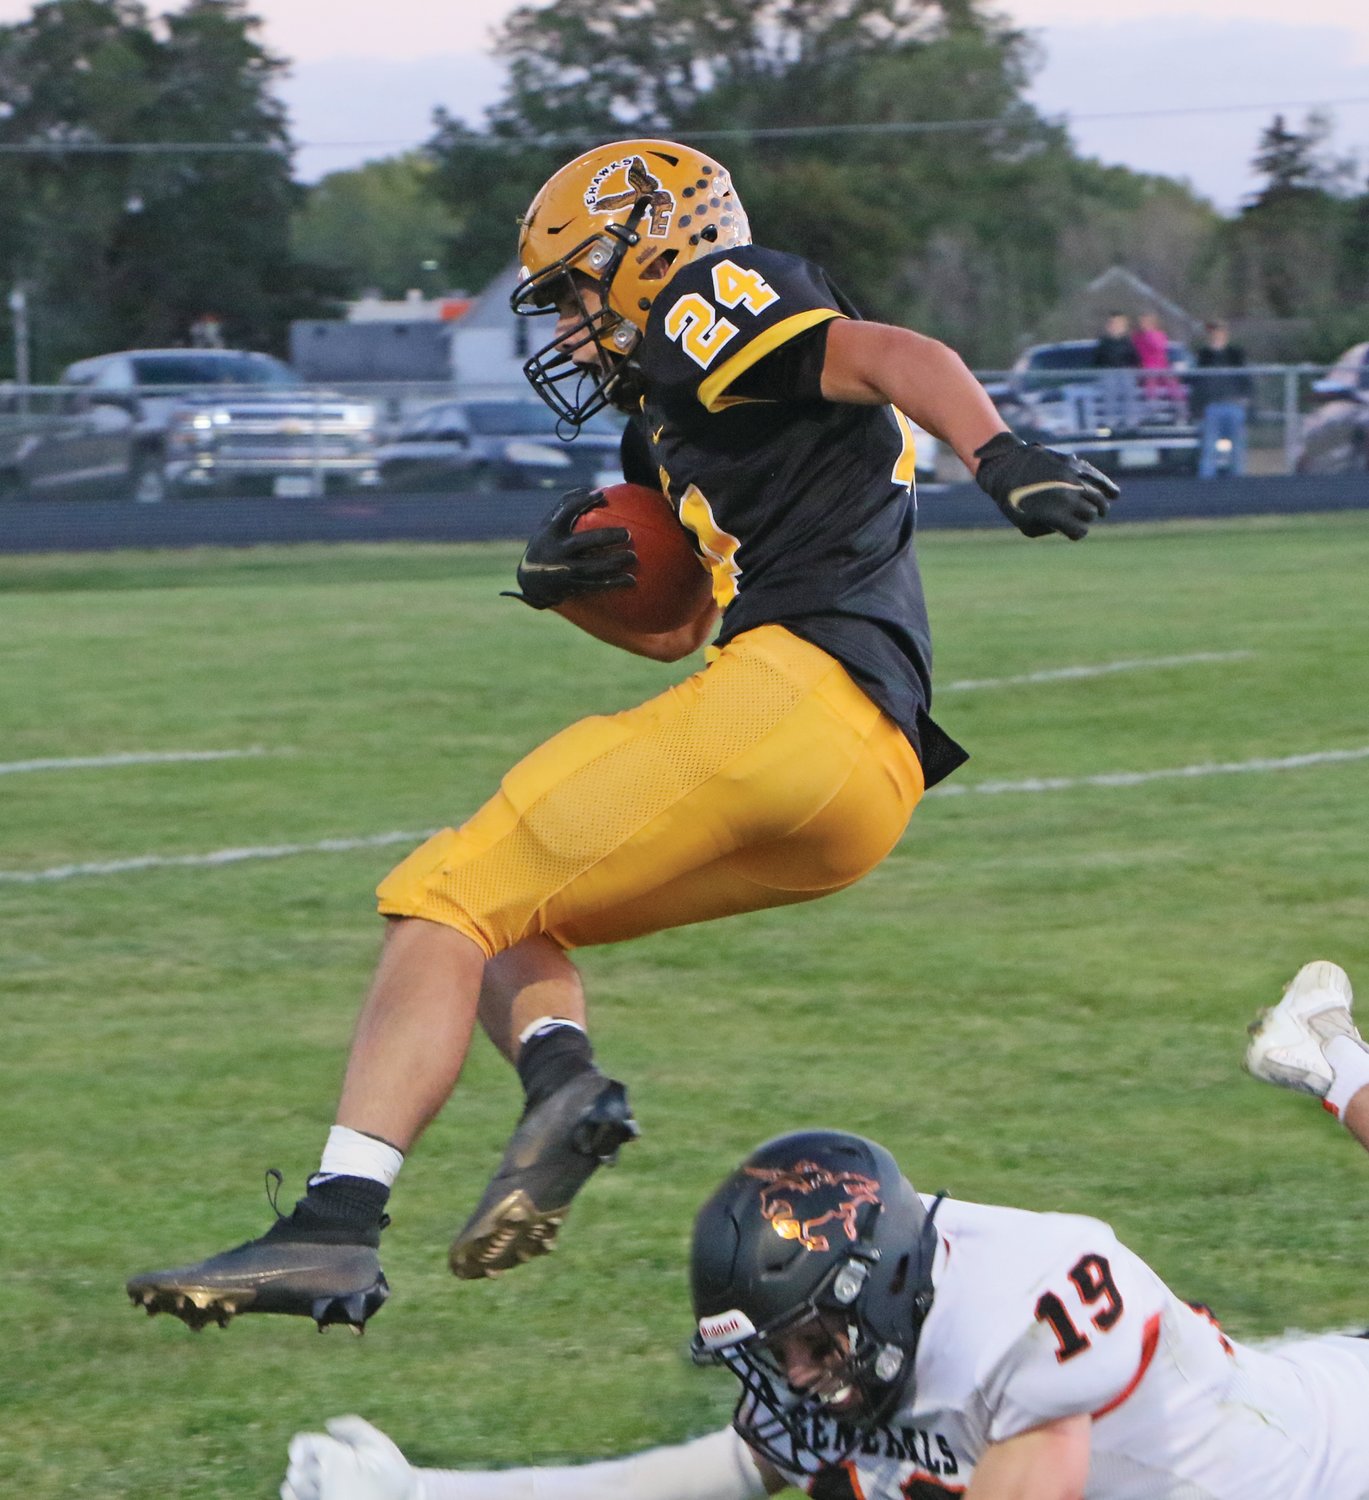 Seth Freeman leaps into the end zone during Emmetsburg's 63-21 Homecoming win over Sibley-Ocheyedan.